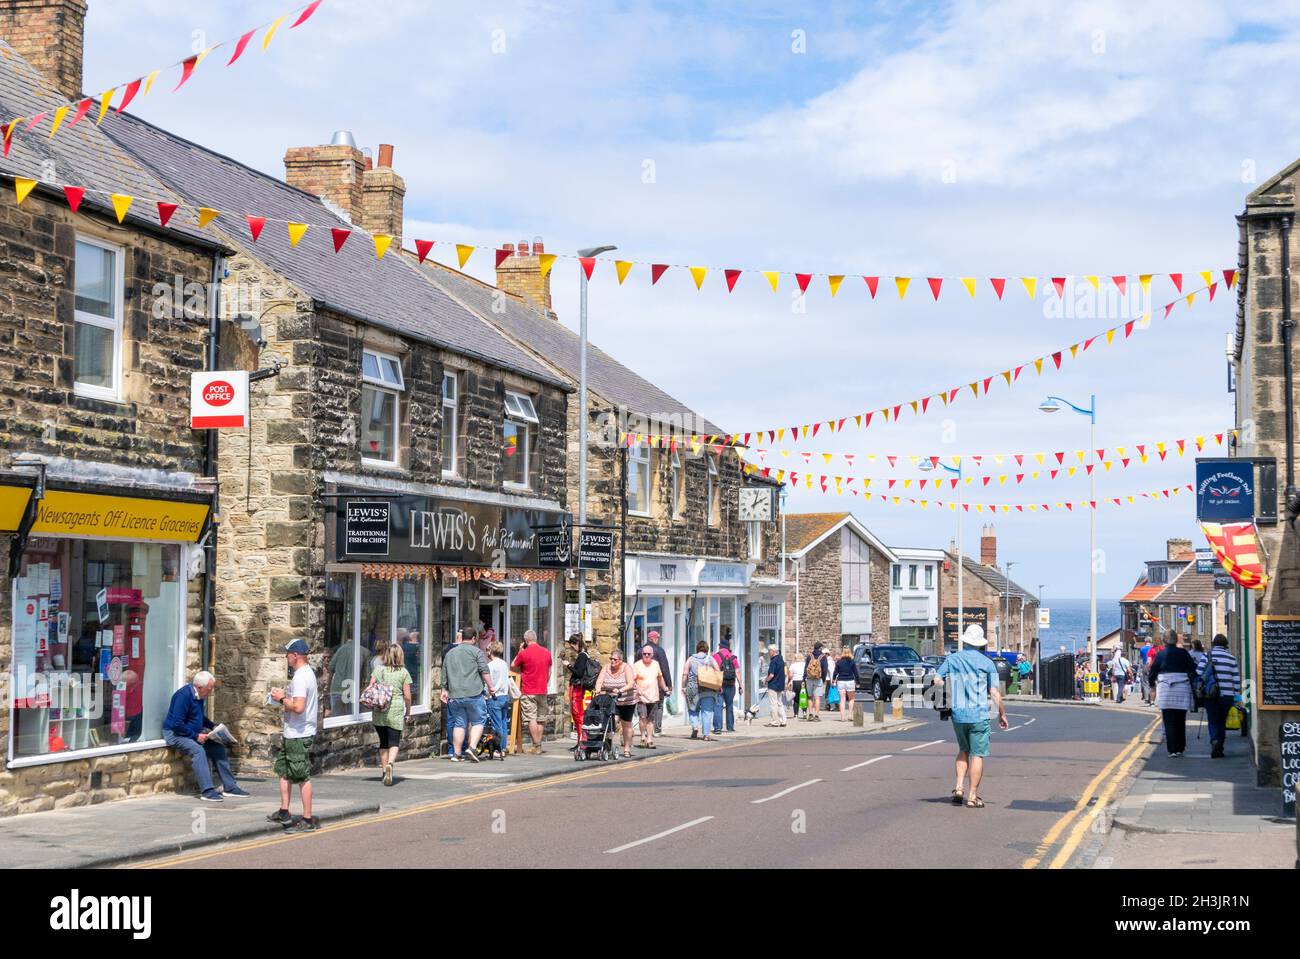 Tourists shopping in the Shops on the Main street decked in bunting through Seahouses Northumberland England UK GB Europe Stock Photo